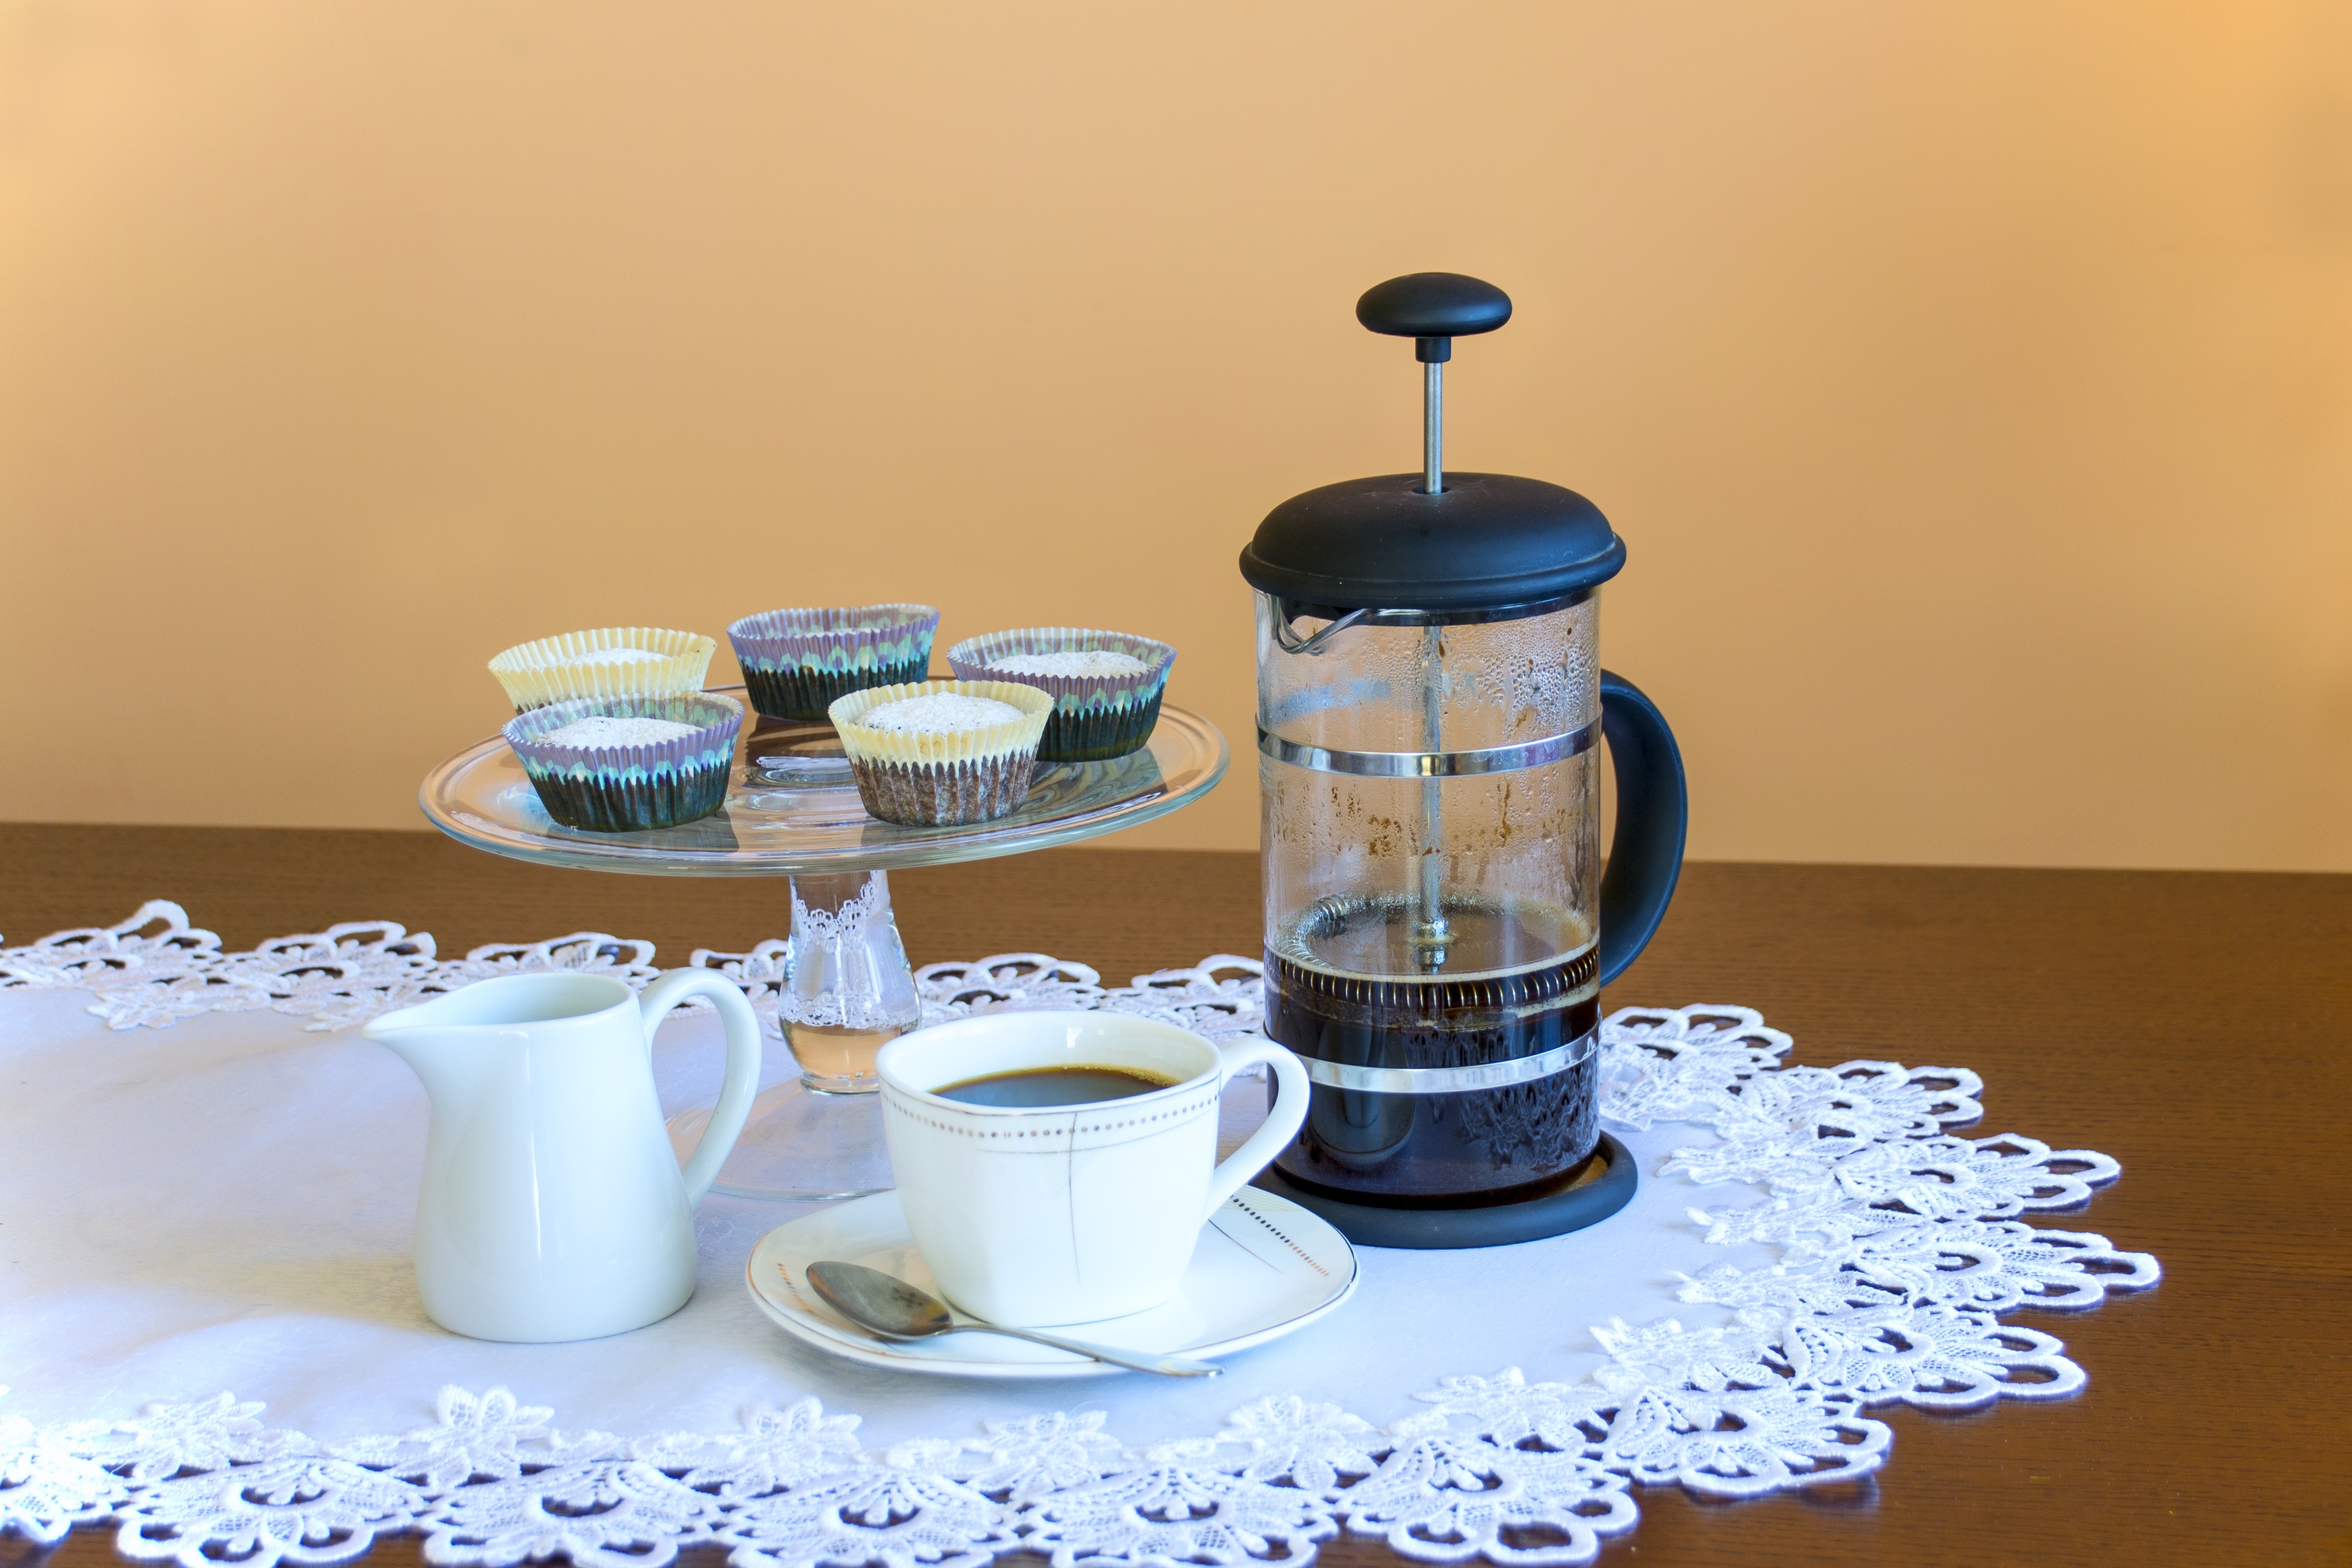 Coffee Maker, Coffee, Muffin, salt shaker, colored background